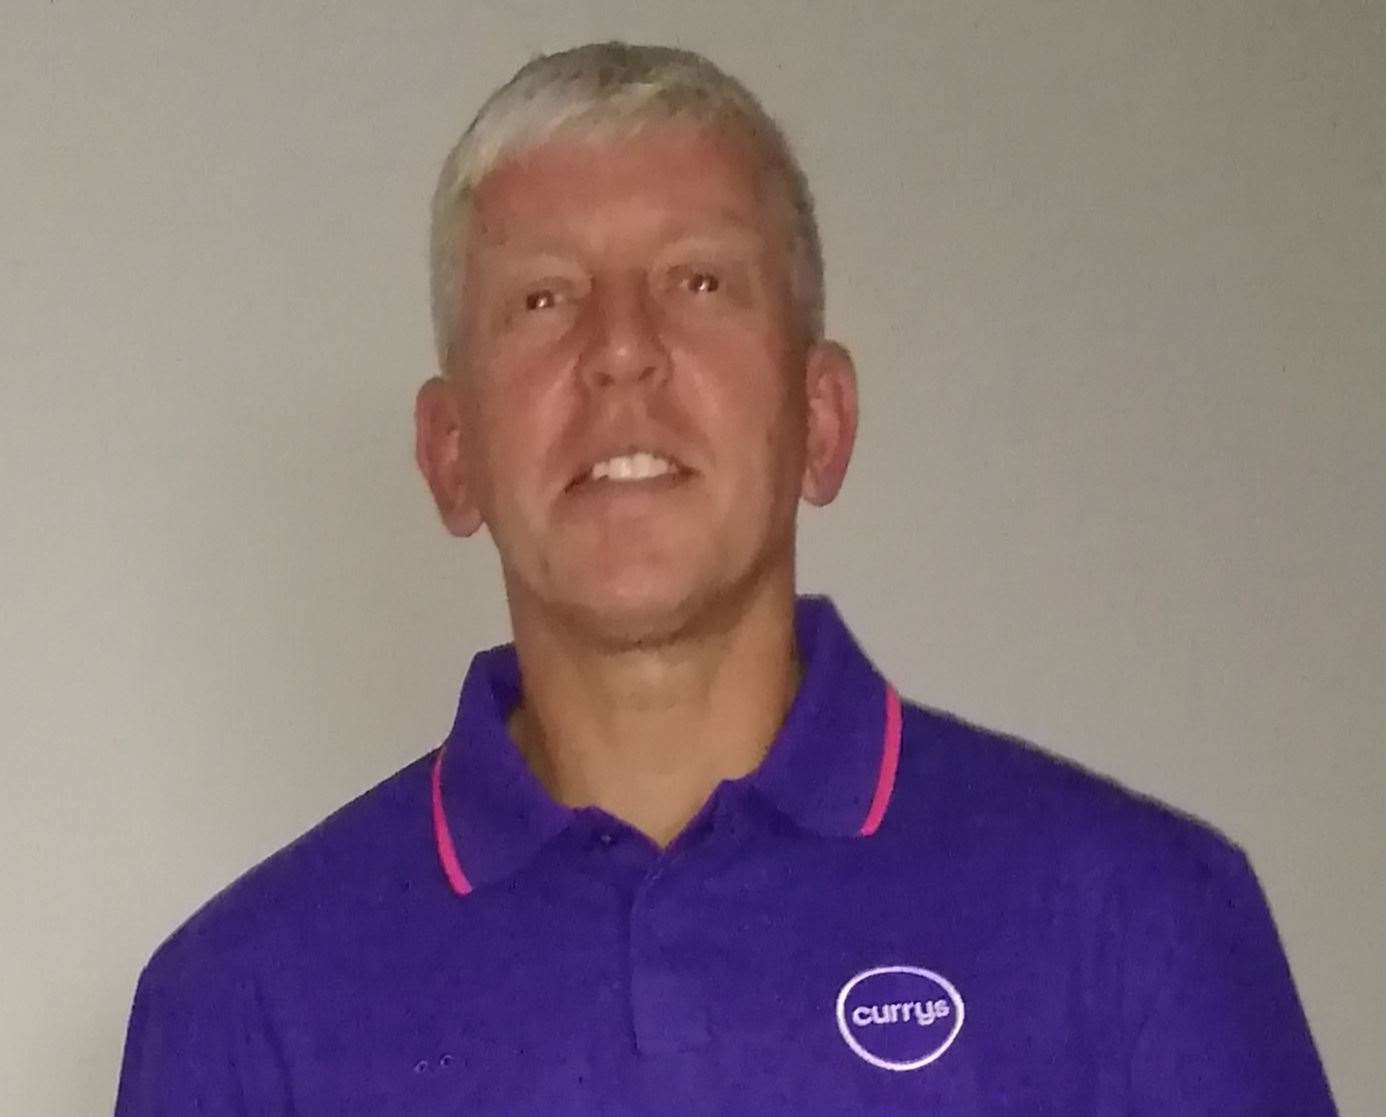 Delivery driver Martin Lees